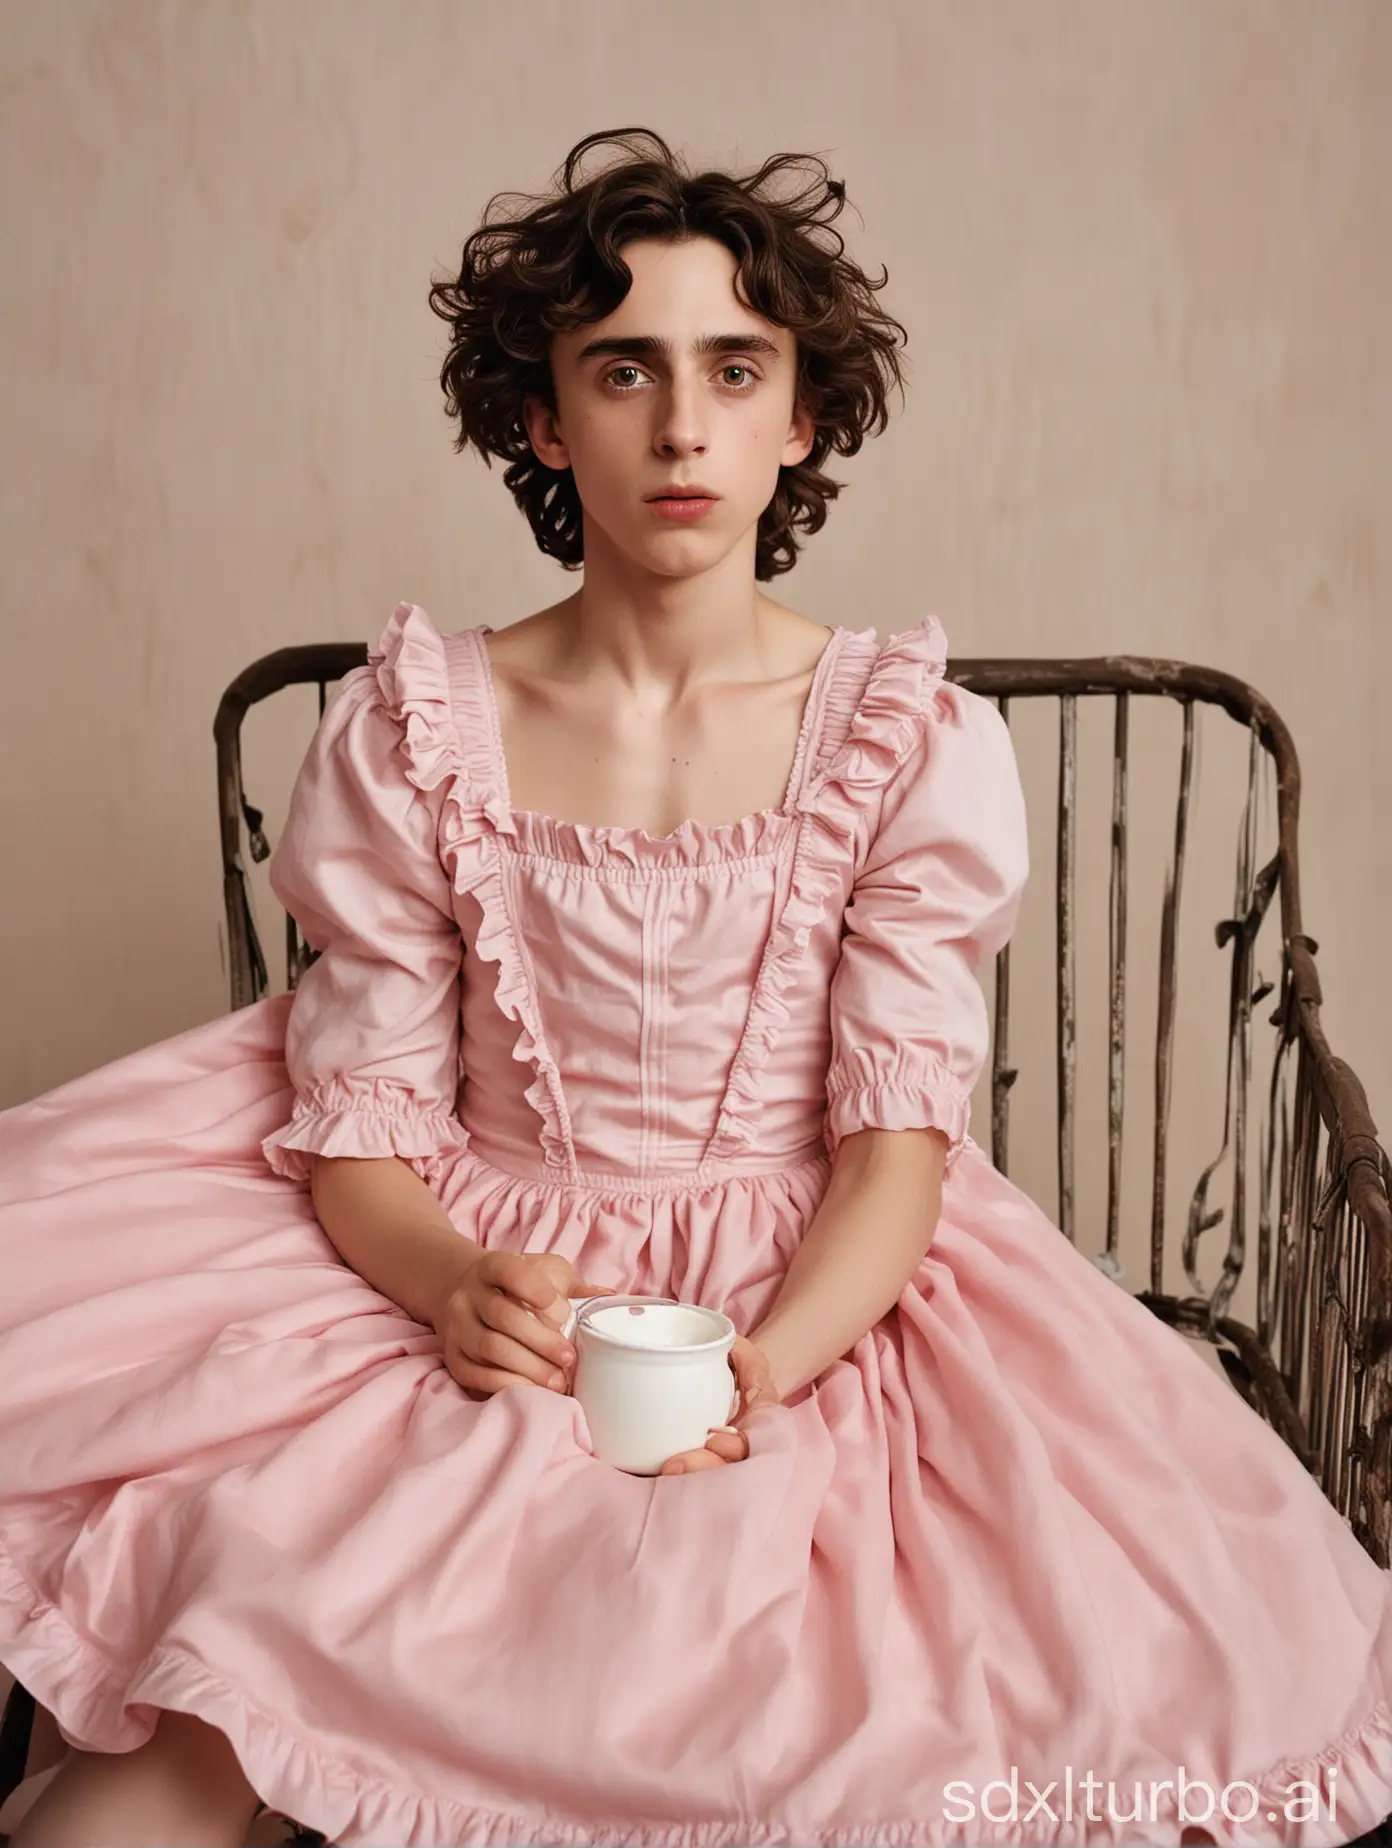 ((Gender role reversal)), photograph of an Unbreeched Timotheè Chalamet (age 23 but acting like a brat) wearing a long pink ballerina dress and a bib, sitting strapped in an oversized pram, throwing A tantrum while eating a yoghurt he doesn’t like